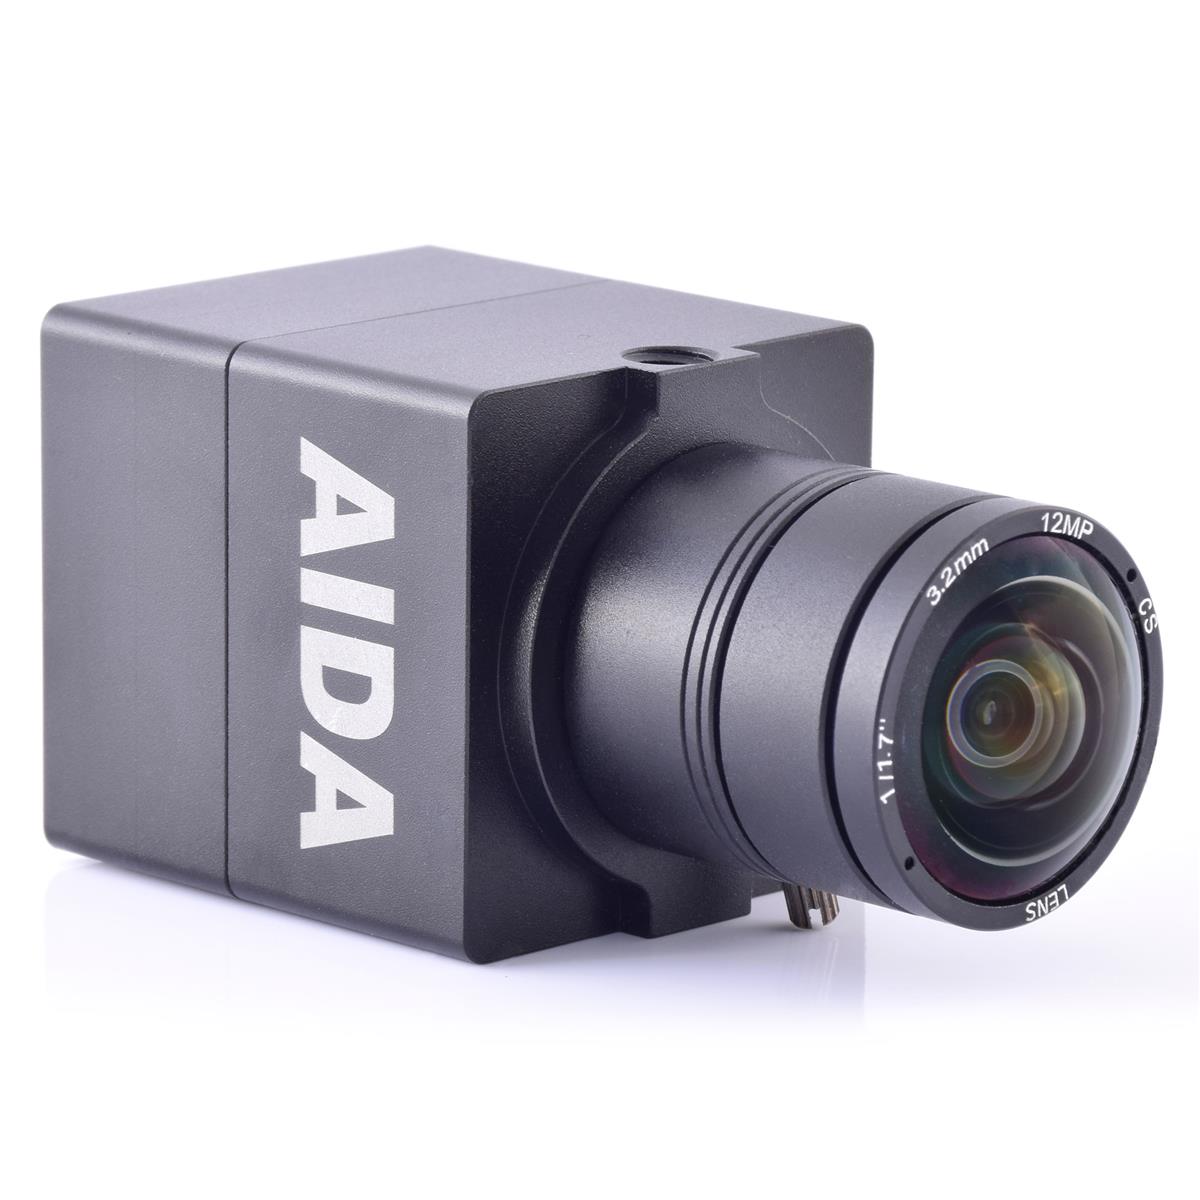 Image of AIDA UHD-100A Micro 4K Ultra HD HDMI 1.4 POV Camera with TRS Stereo Audio Input